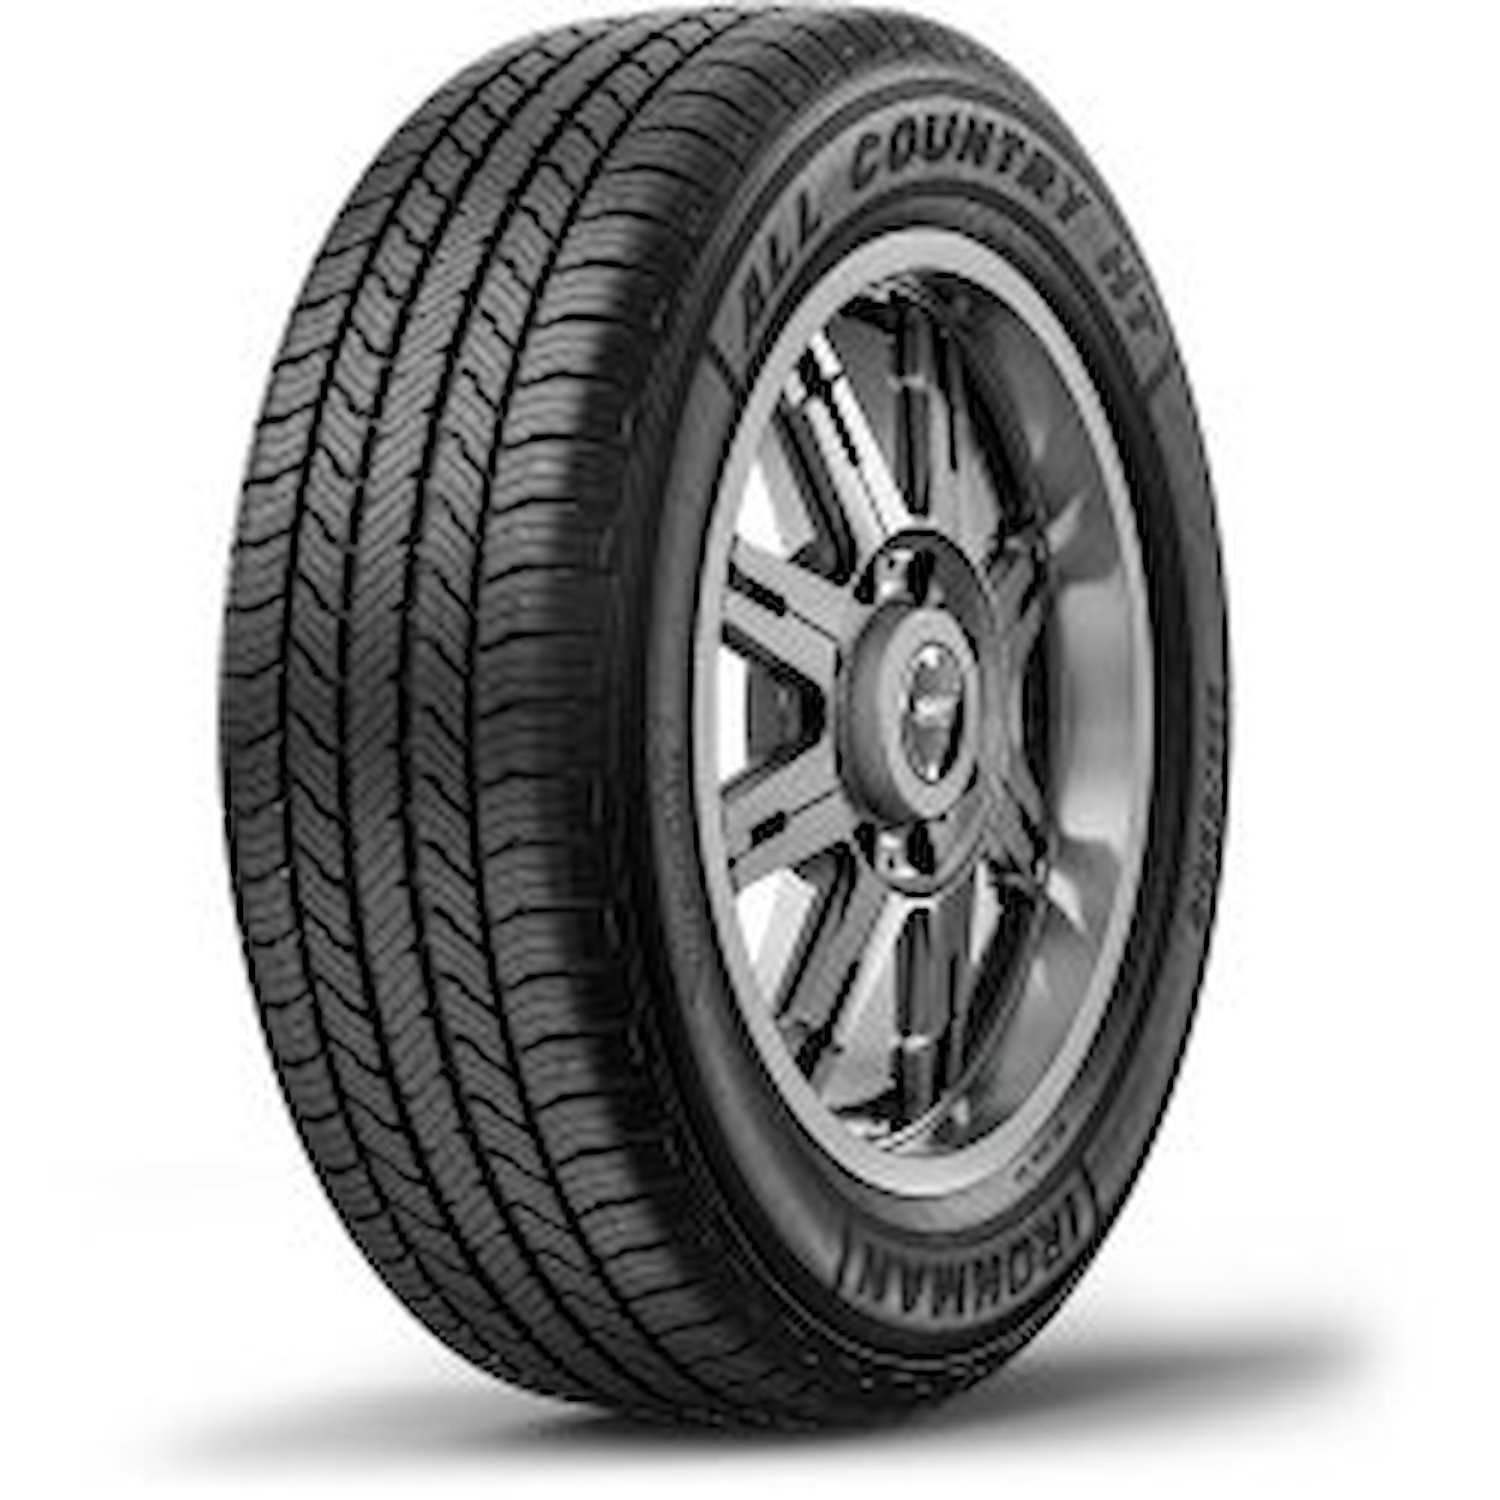 03106 All Country HT Tire, 235/55R18, 100H